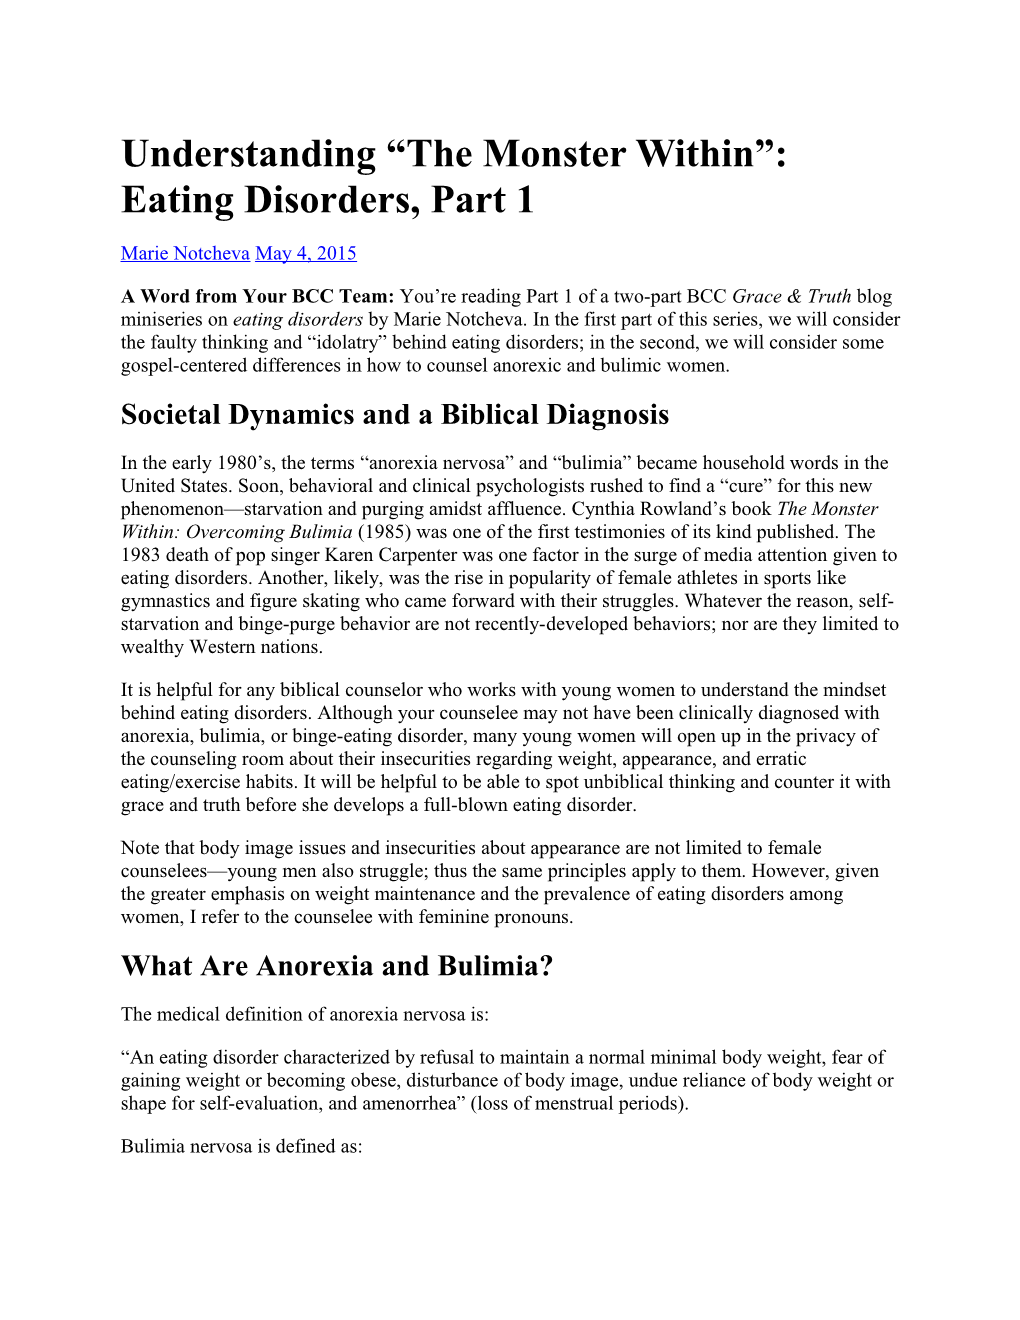 Understanding the Monster Within : Eating Disorders, Part 1